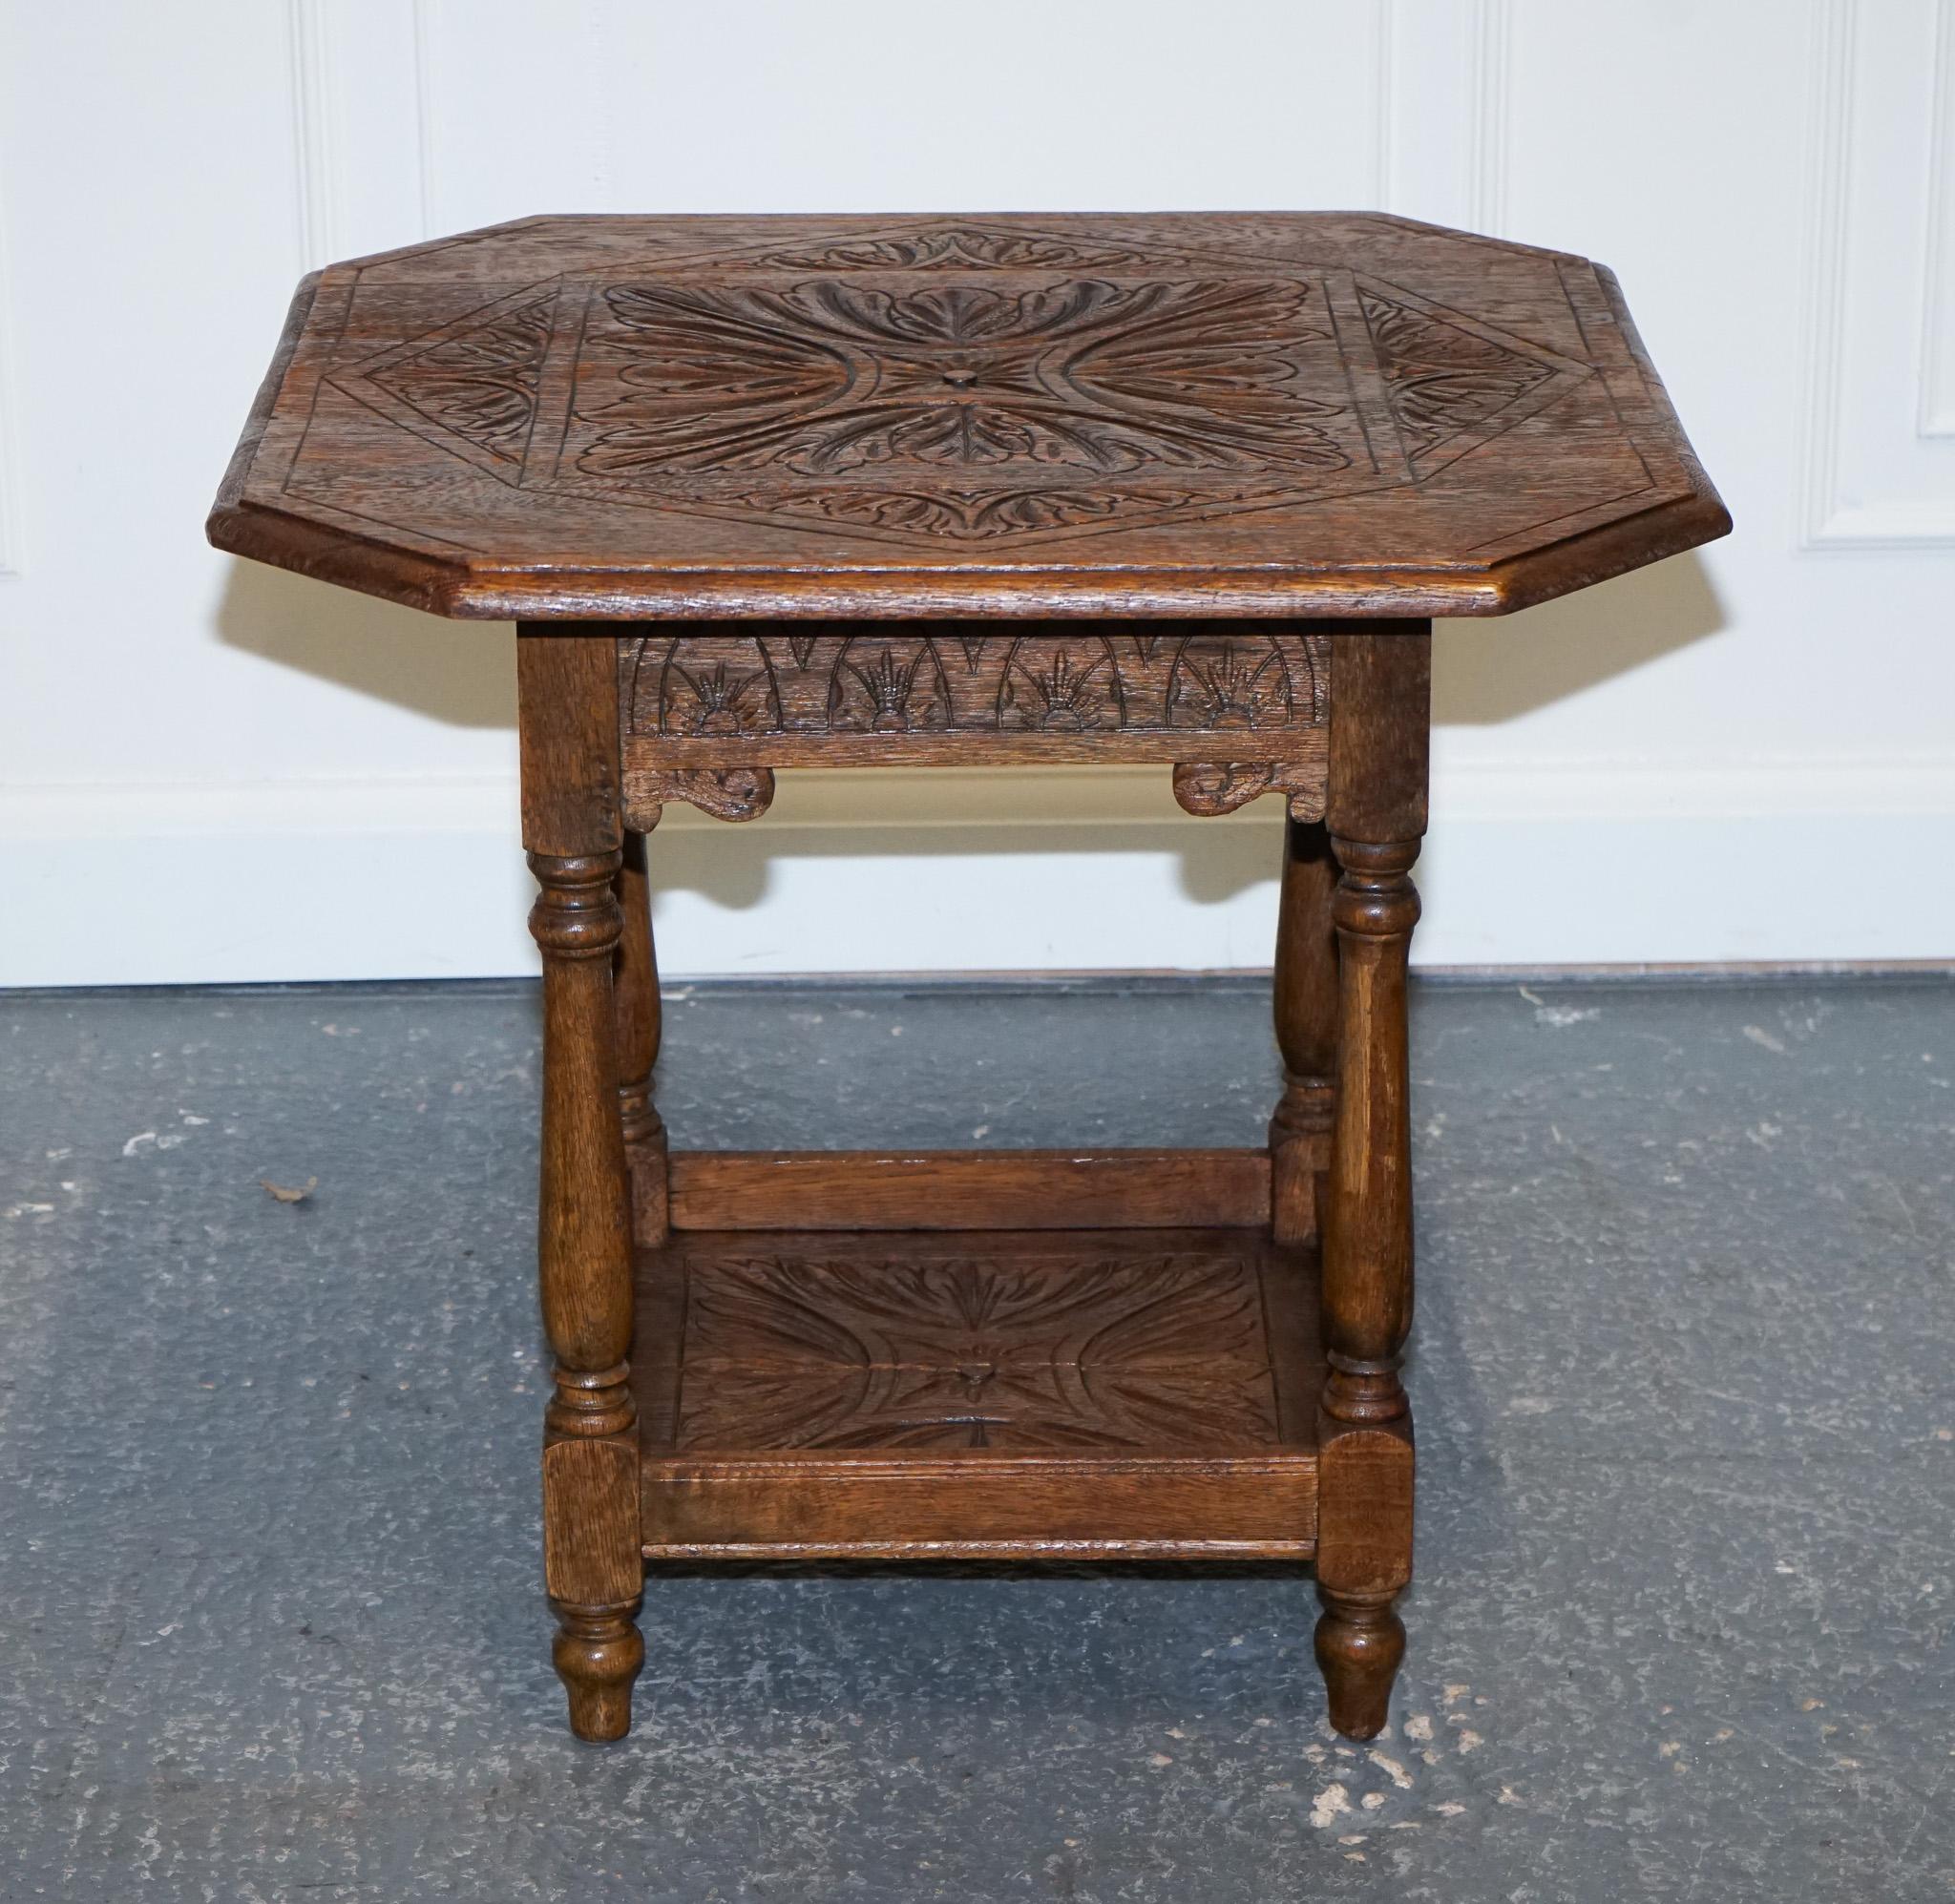 
We are delighted to offer for sale this Lovely Carved Oak Gothic Table.

A lovely carved Gothic oak side table is a striking piece of furniture that exudes a sense of grandeur and timeless beauty. Crafted from high-quality oak wood, this side table